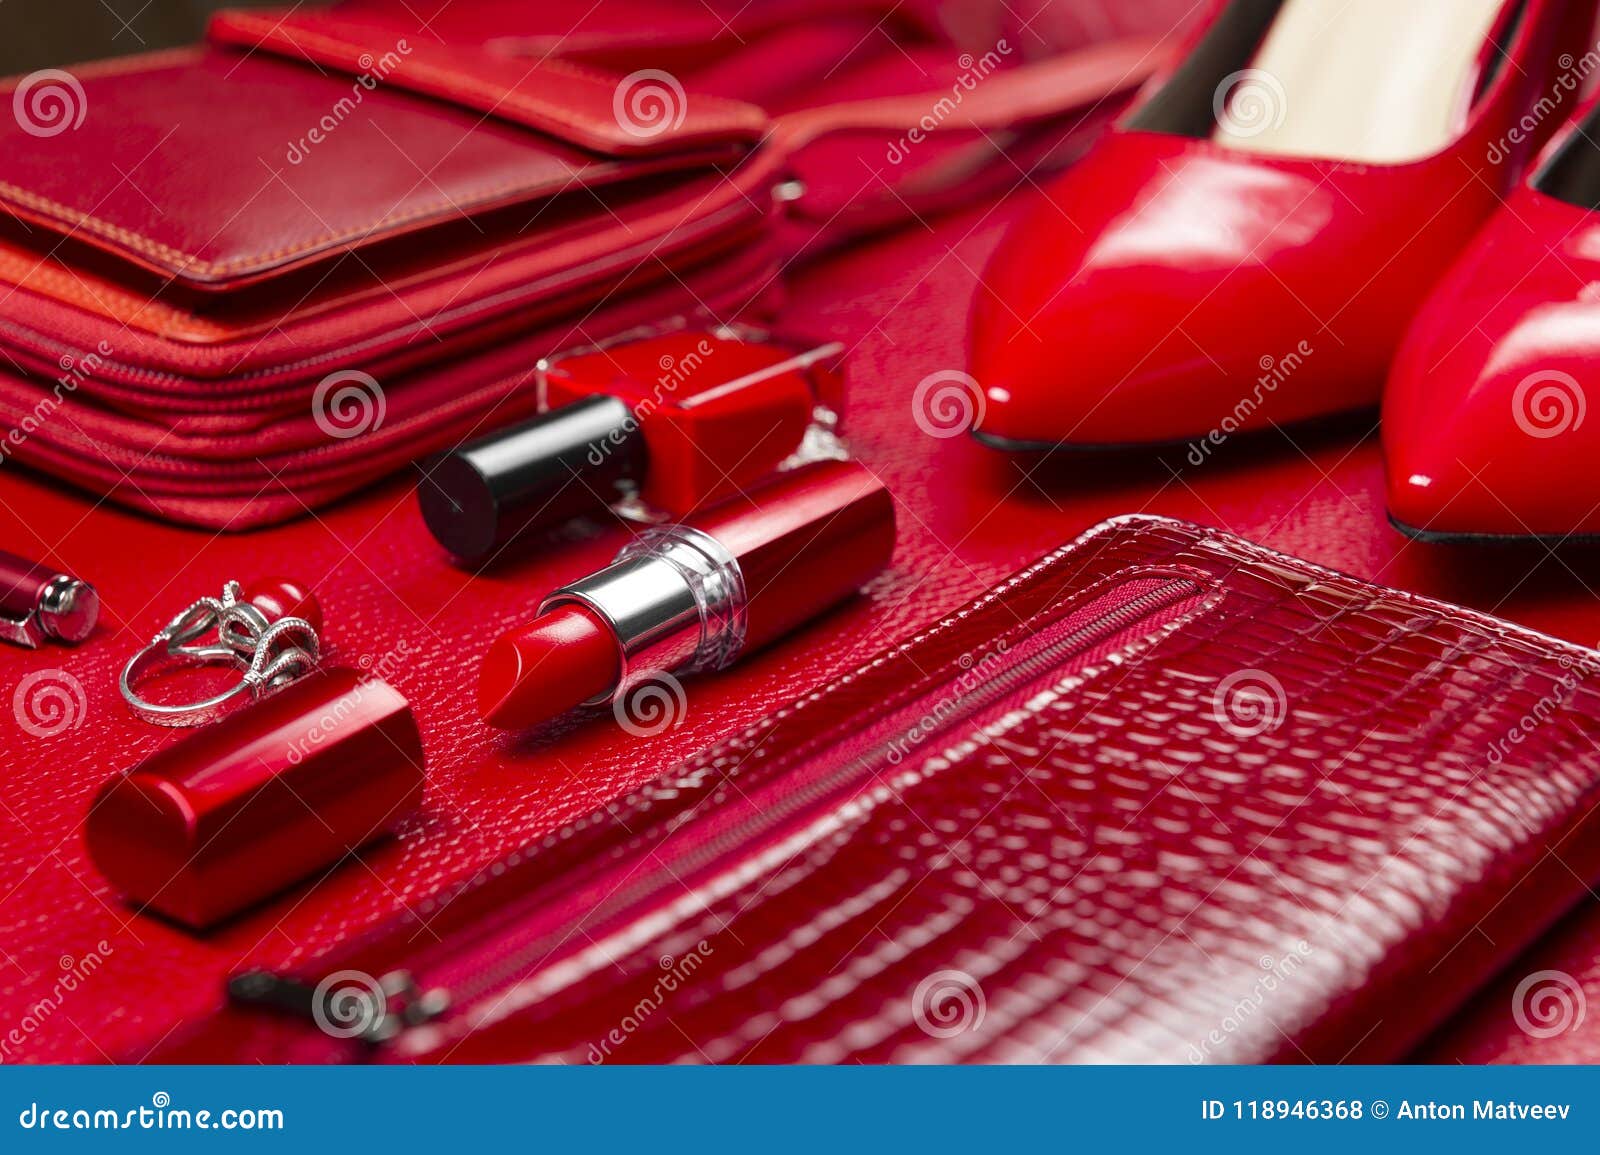 Woman red accessories stock photo. Image of chrome, coral - 118946368